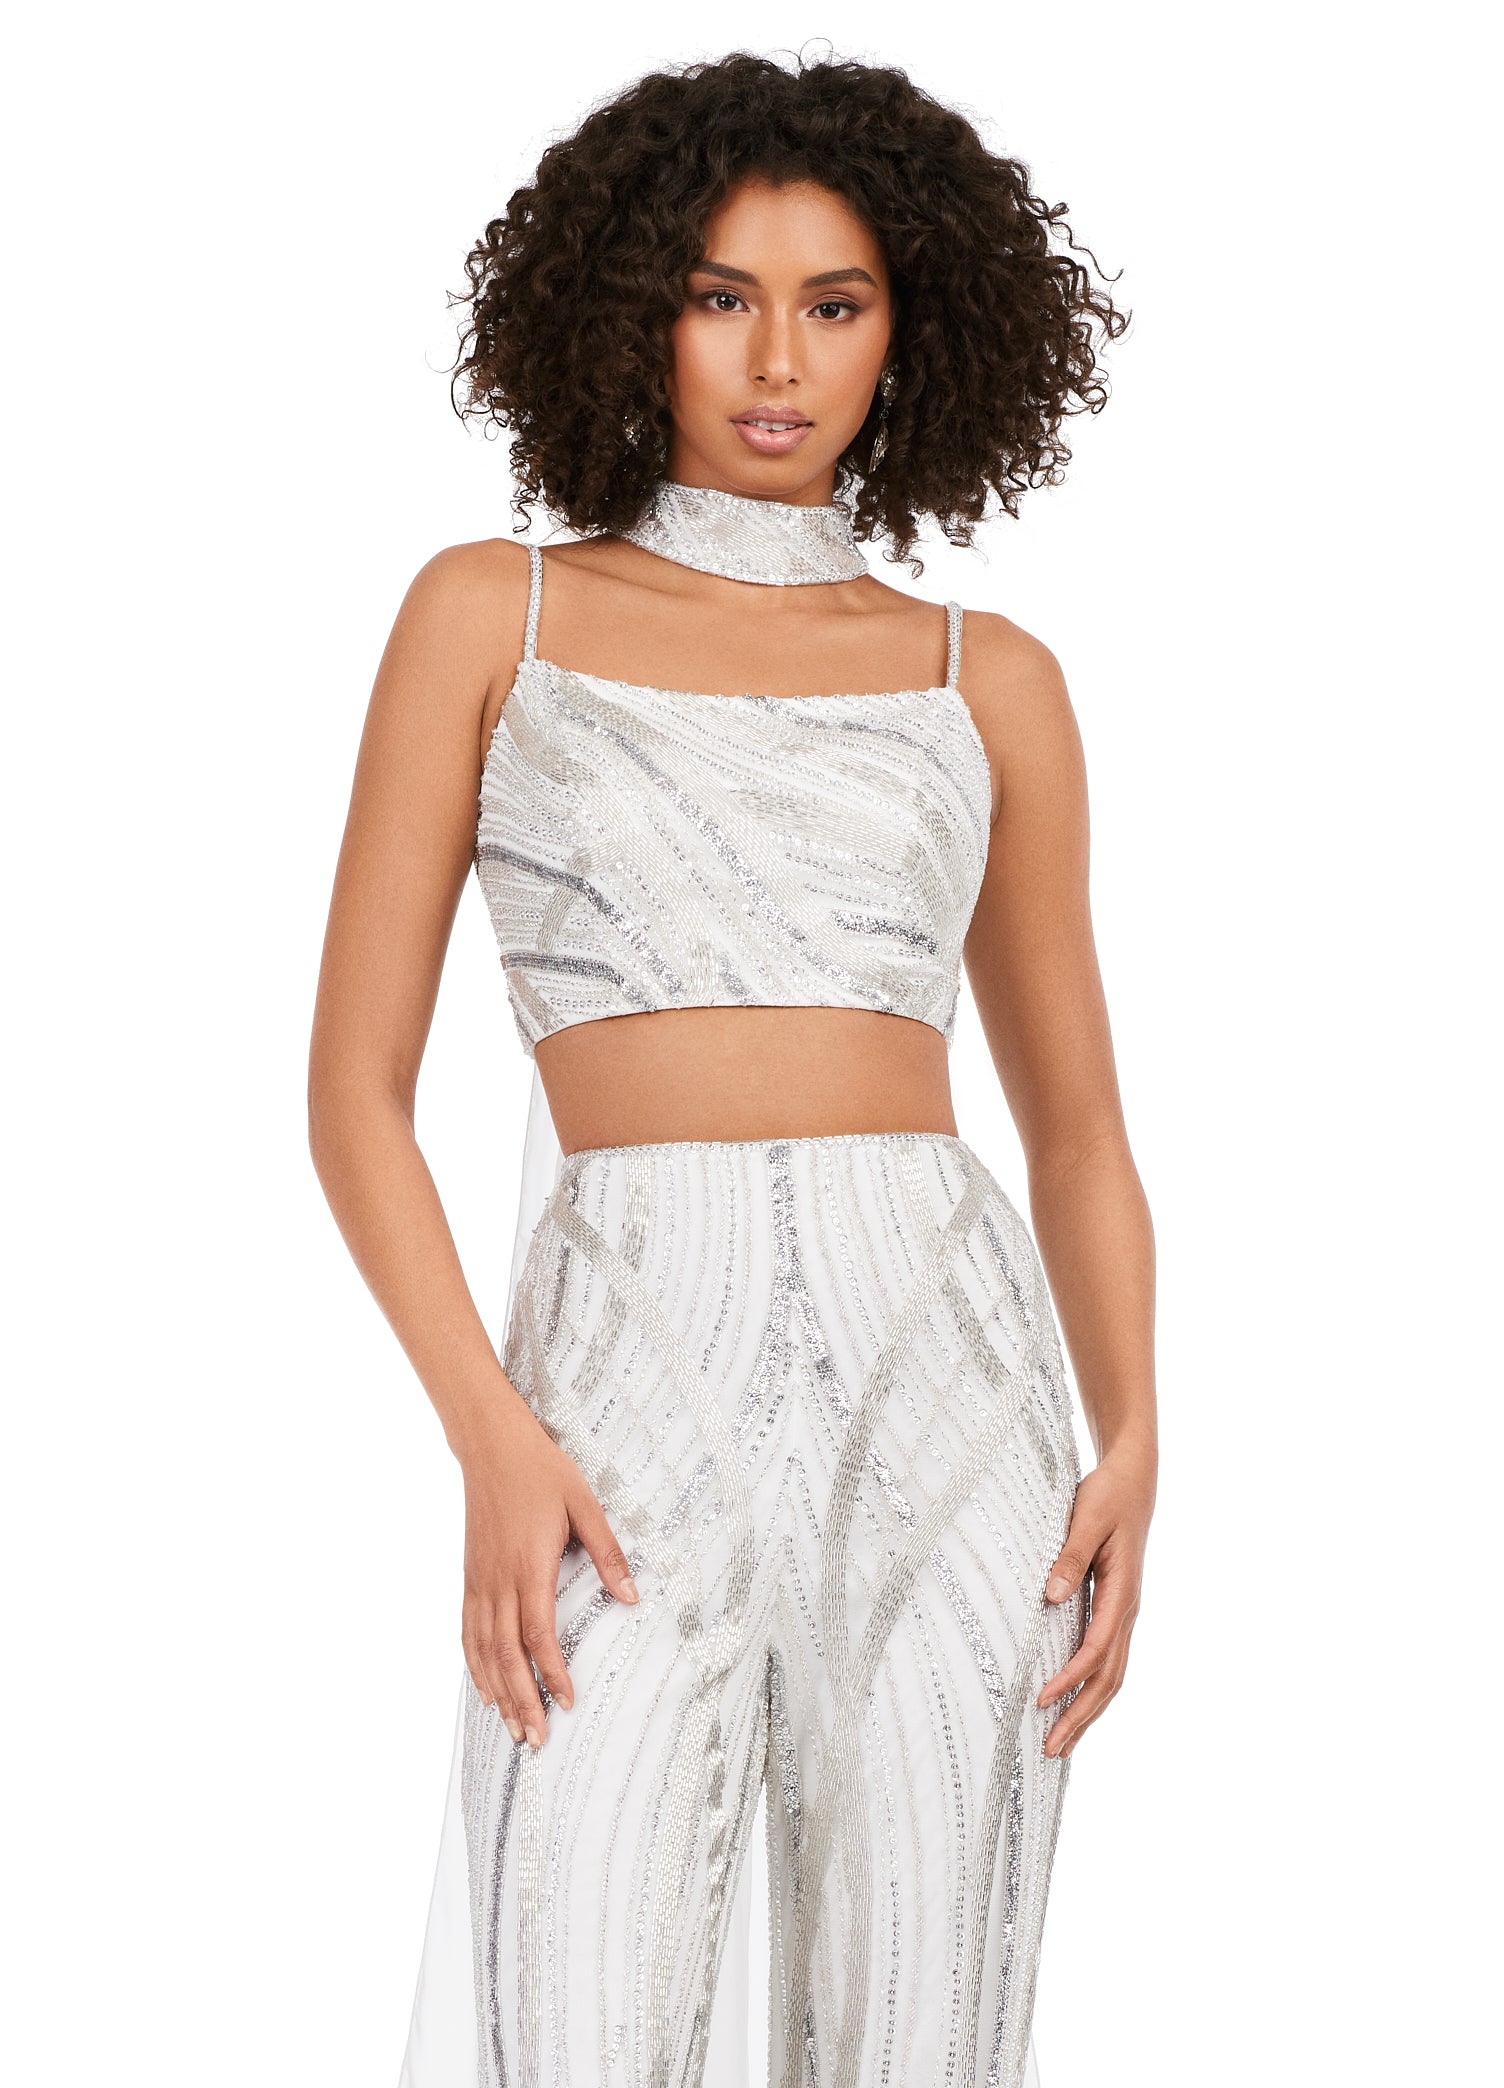 Ashley Lauren 11385 Fully Beaded 2-Piece With Chiffon Cape Spaghetti Strap Jumpsuit. Bring on the drama in this jumpsuit. The bustier and pants are adorned with an intricate bead pattern. The bead pattern continues along the chocker. The choker is complete with a long chiffon cape.